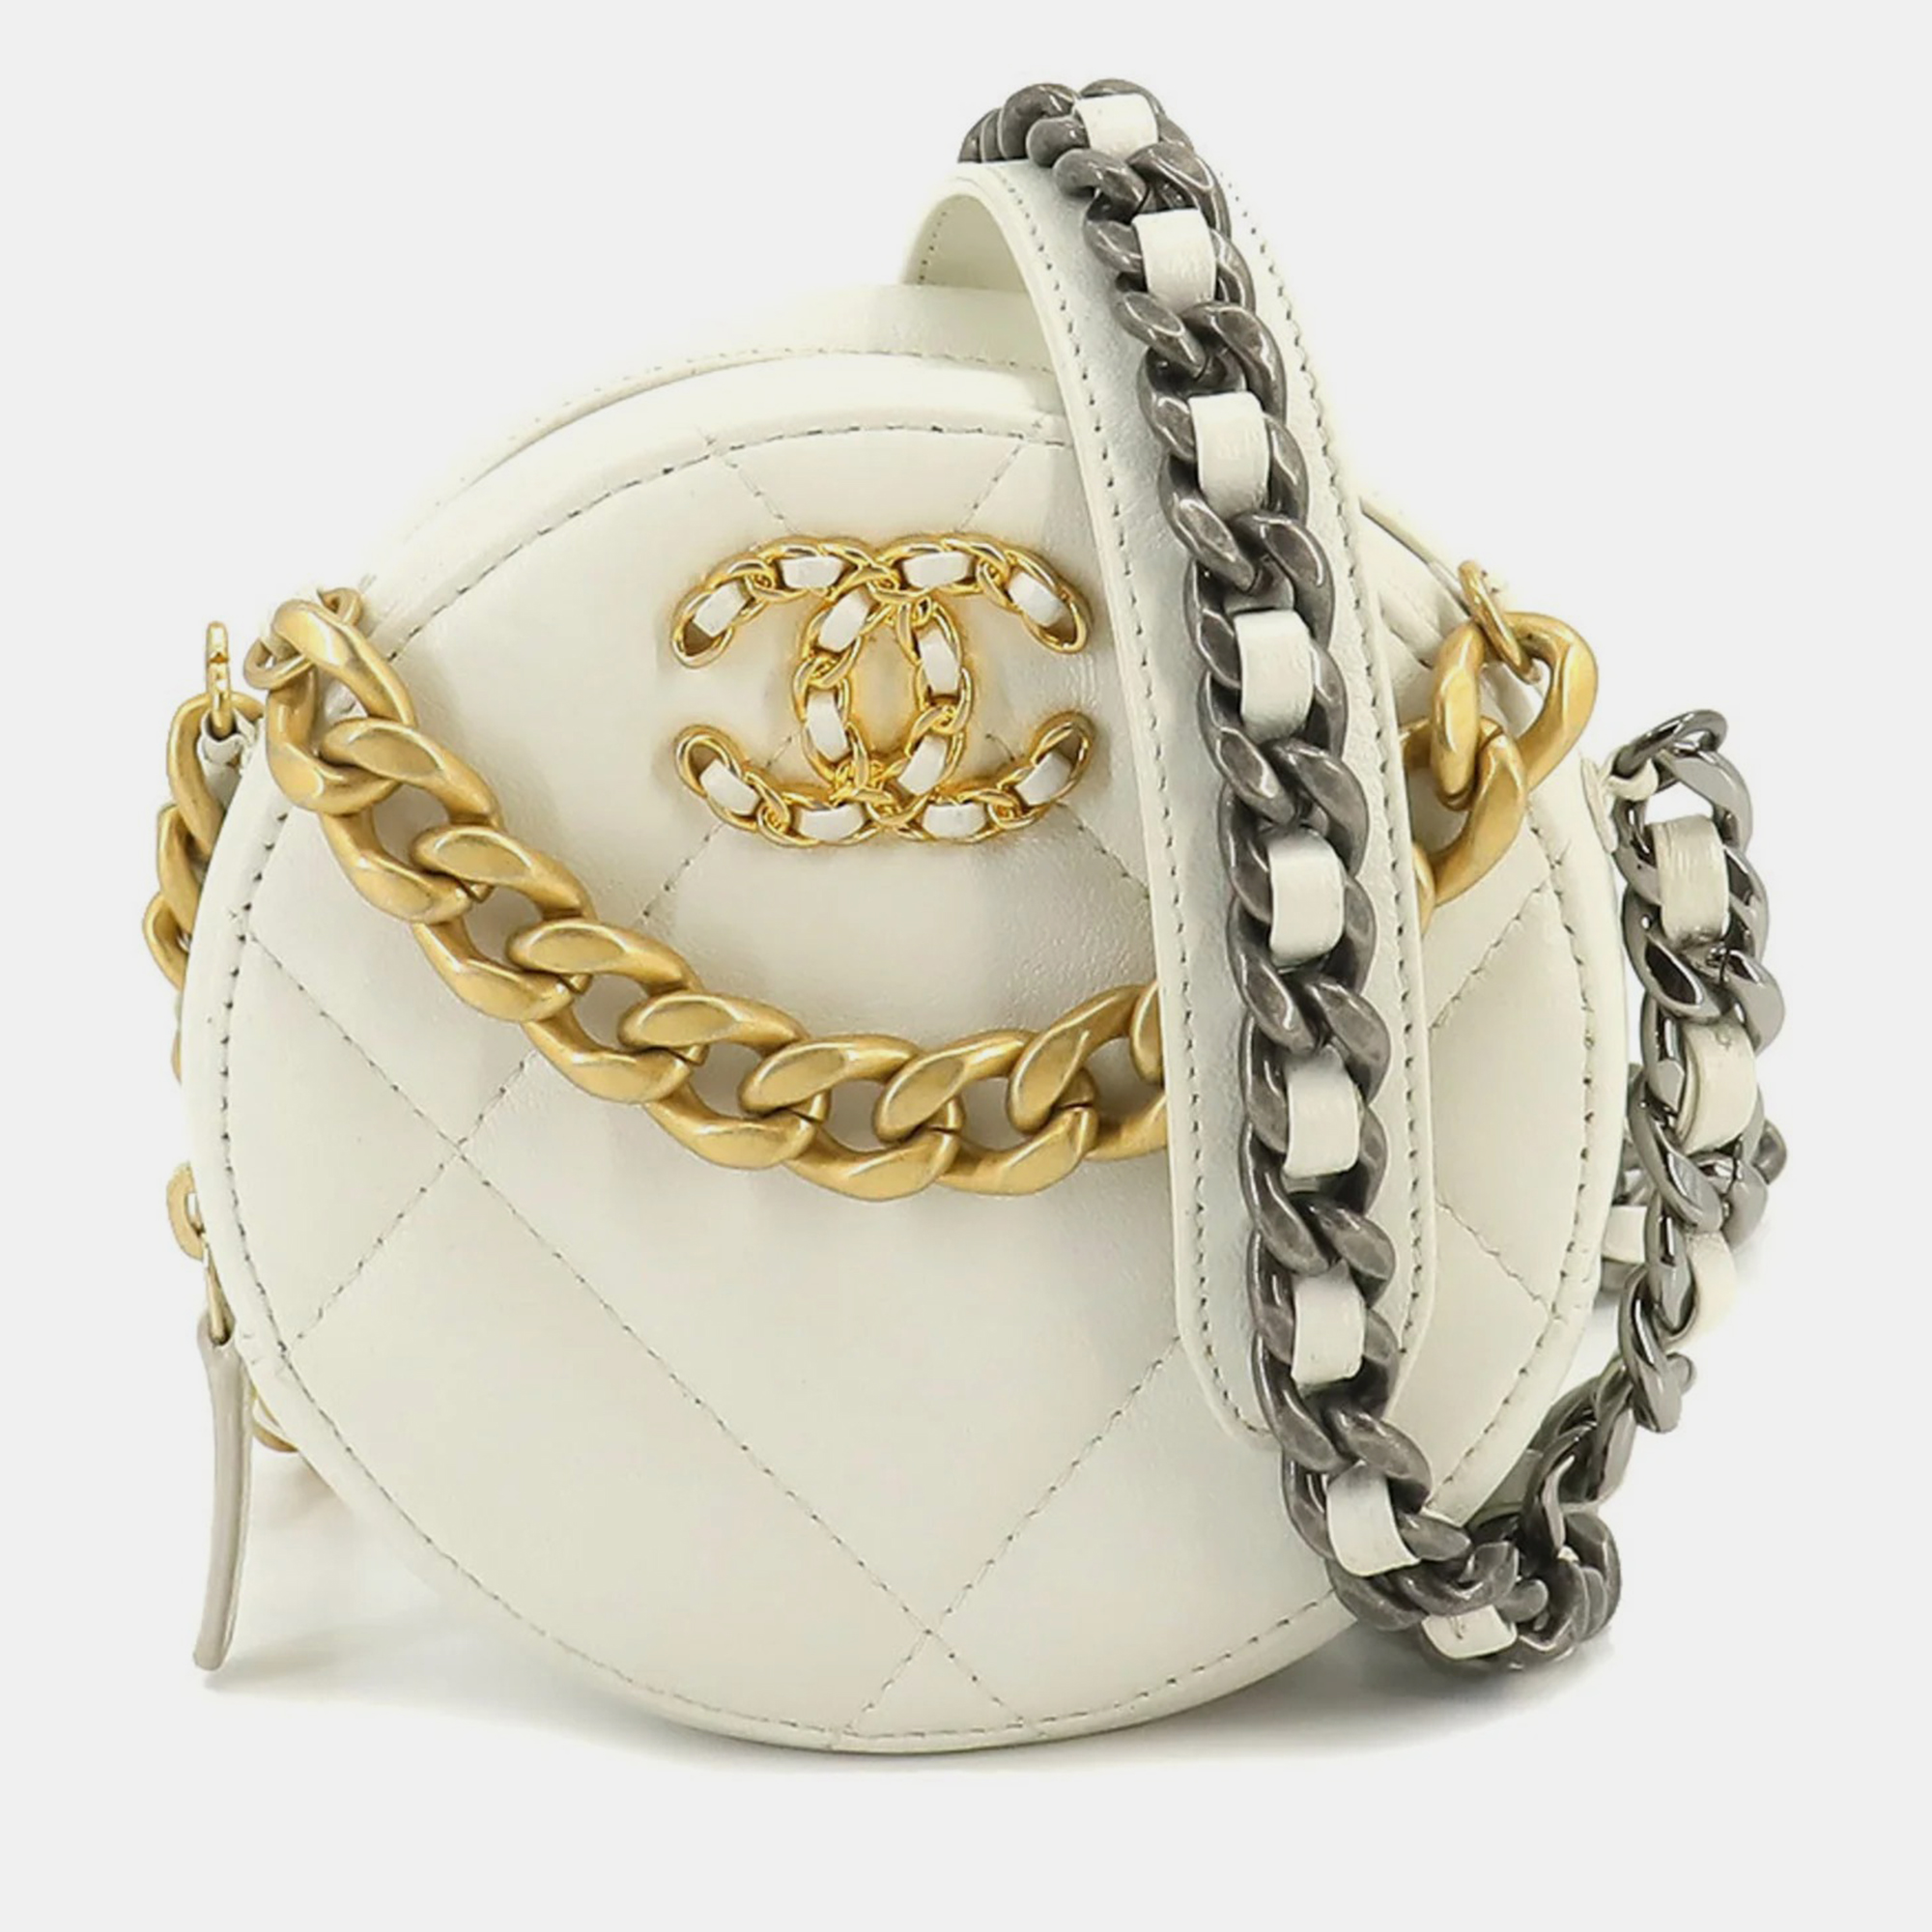 Pre-owned Chanel White Leather 19 Round Clutch Chain Shoulder Bag